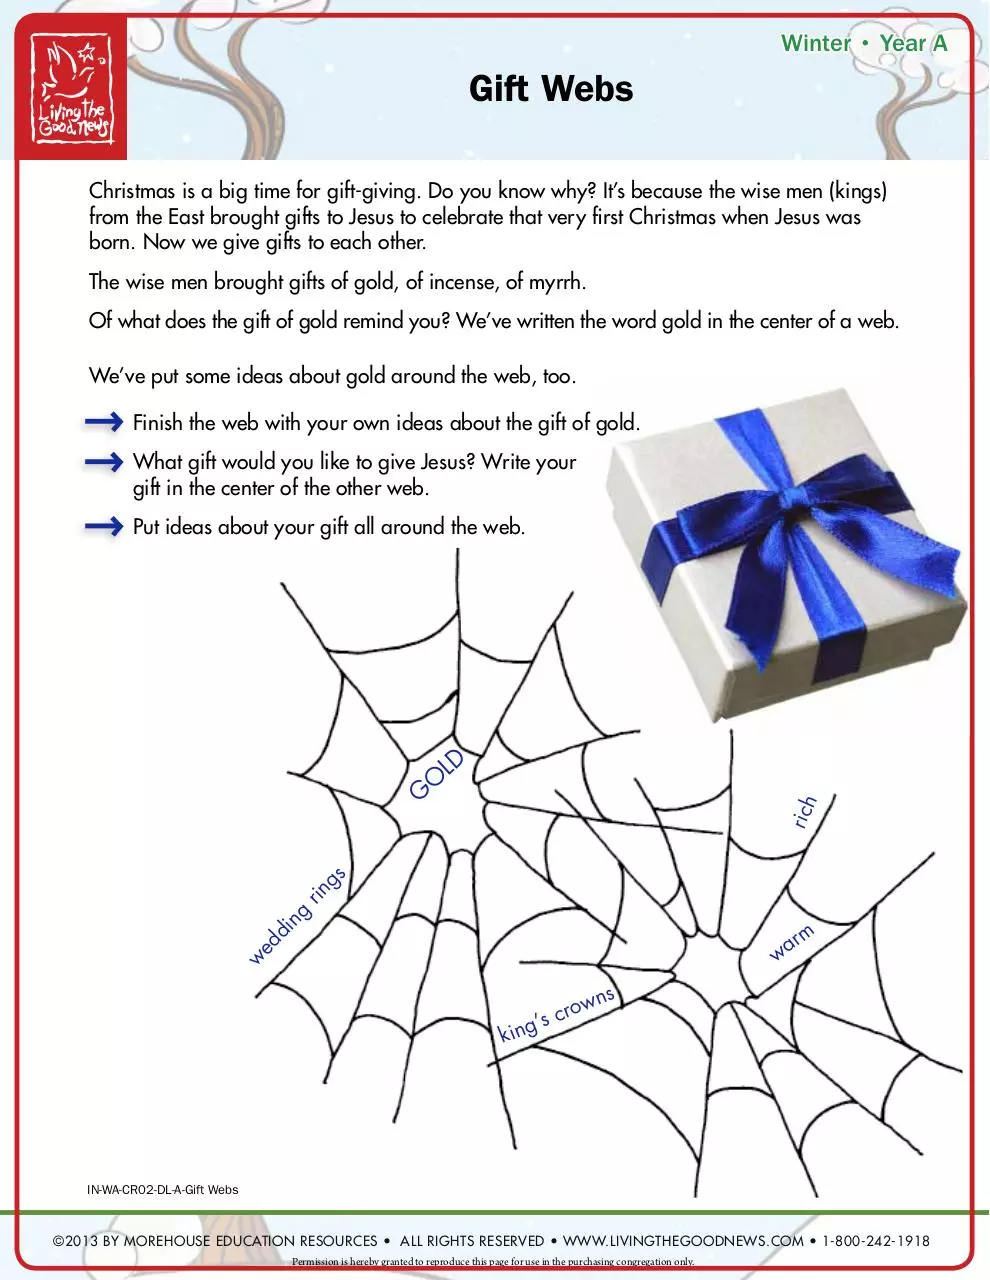 Document preview - IN-WA-CR02-DL-A-Gift Webs.pdf - Page 1/1